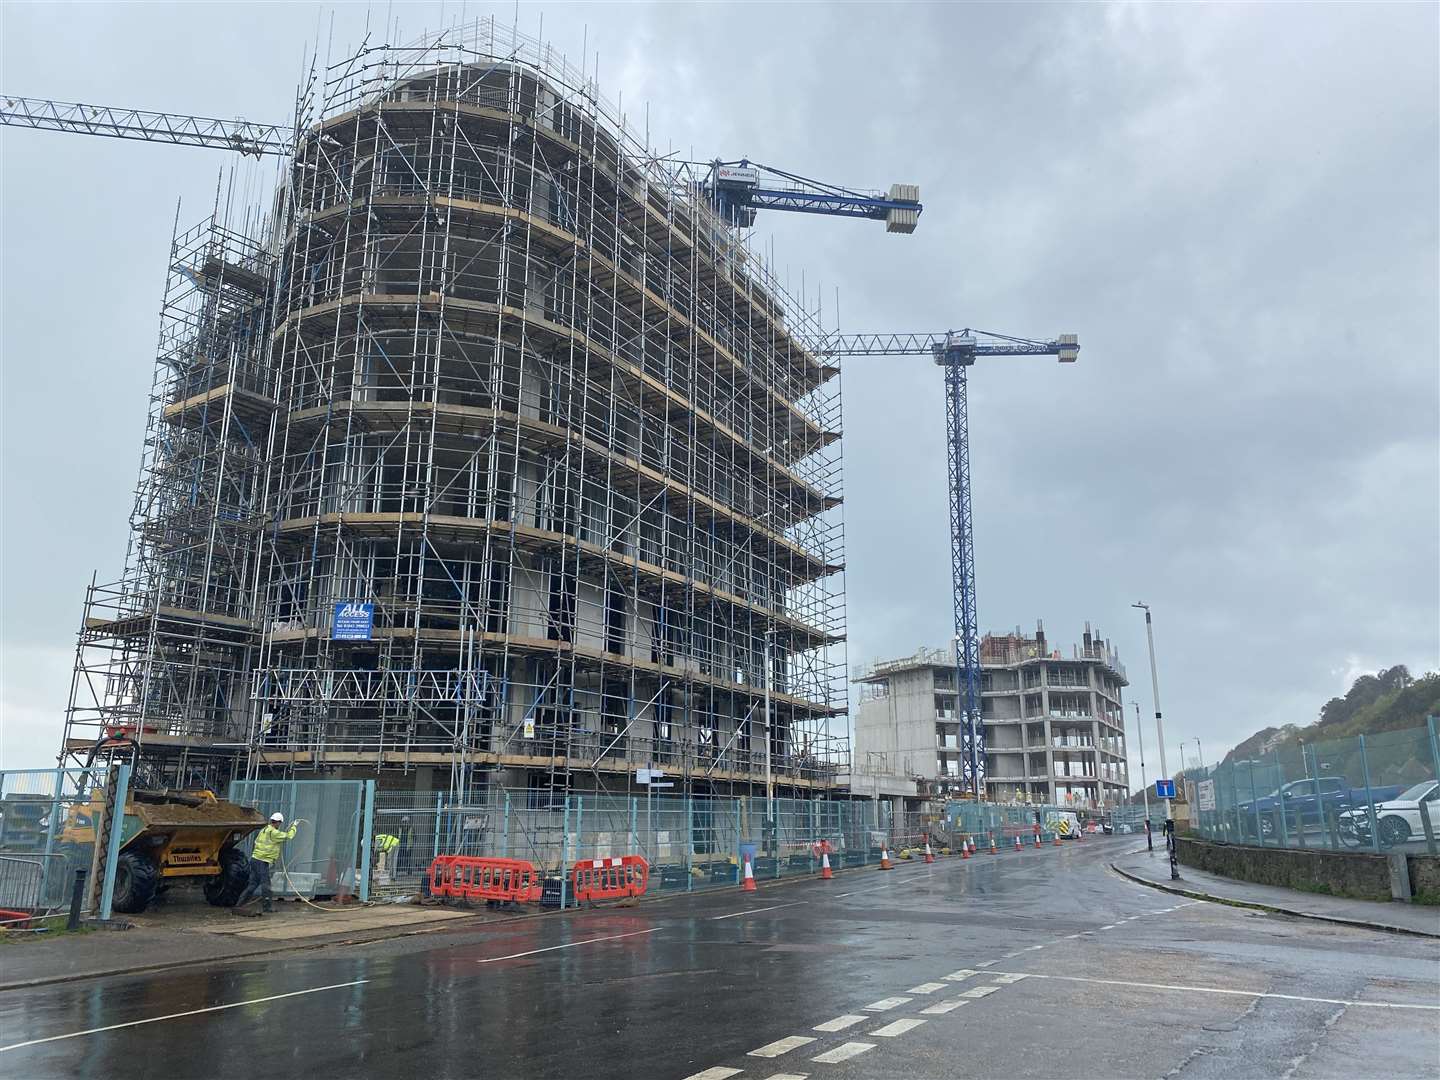 Work continues on phase one of the seafront development in Folkestone